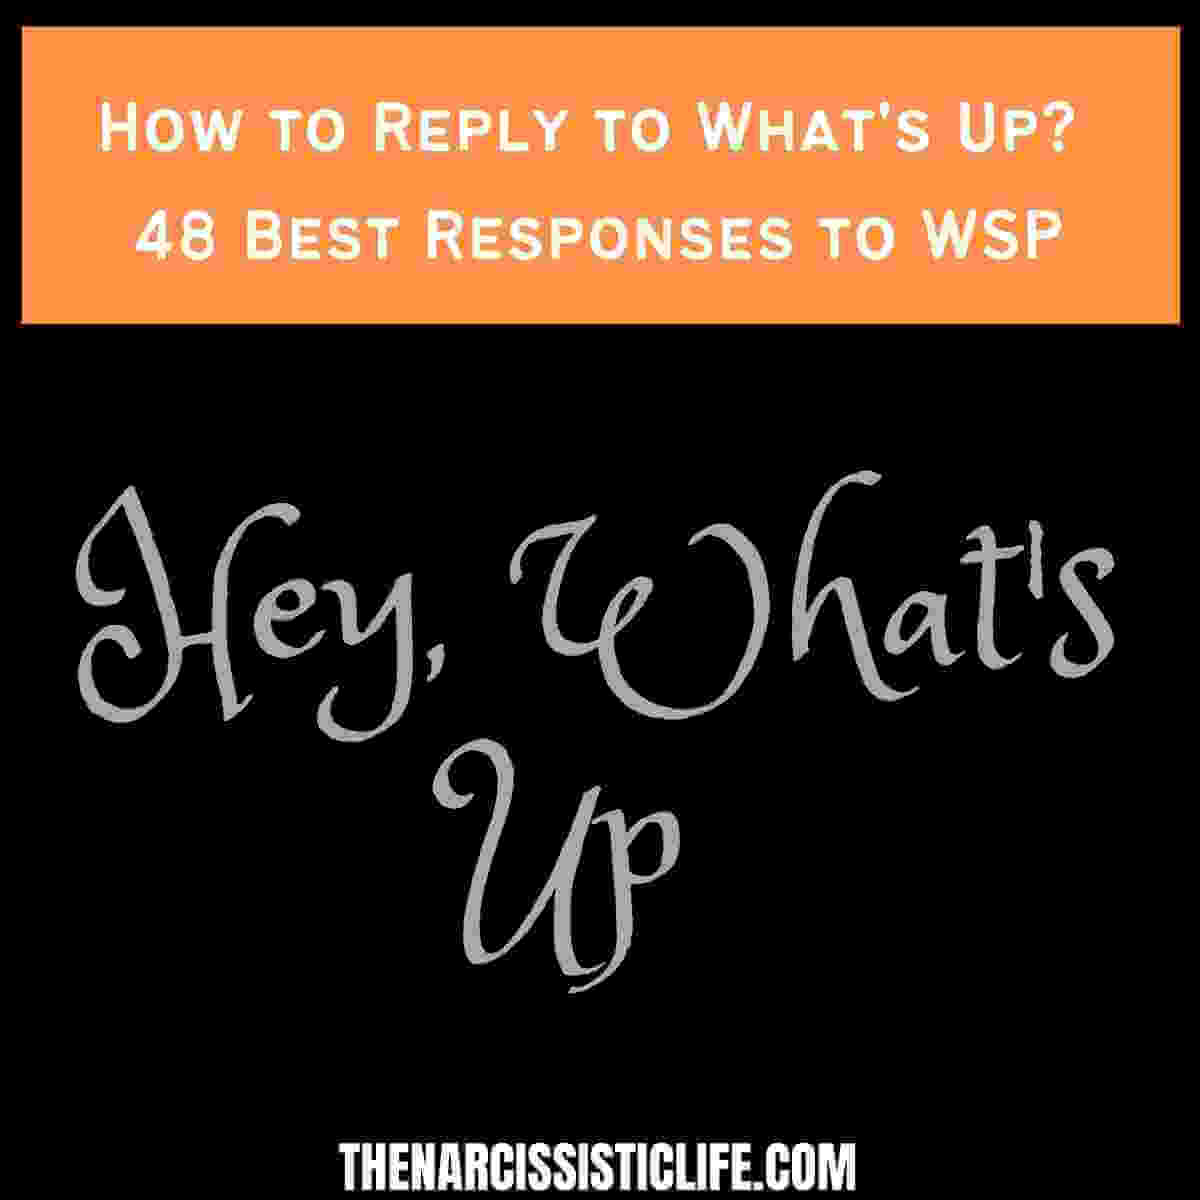 How to Reply to What's Up? 48 Best Responses to WSP - The Narcissistic Life